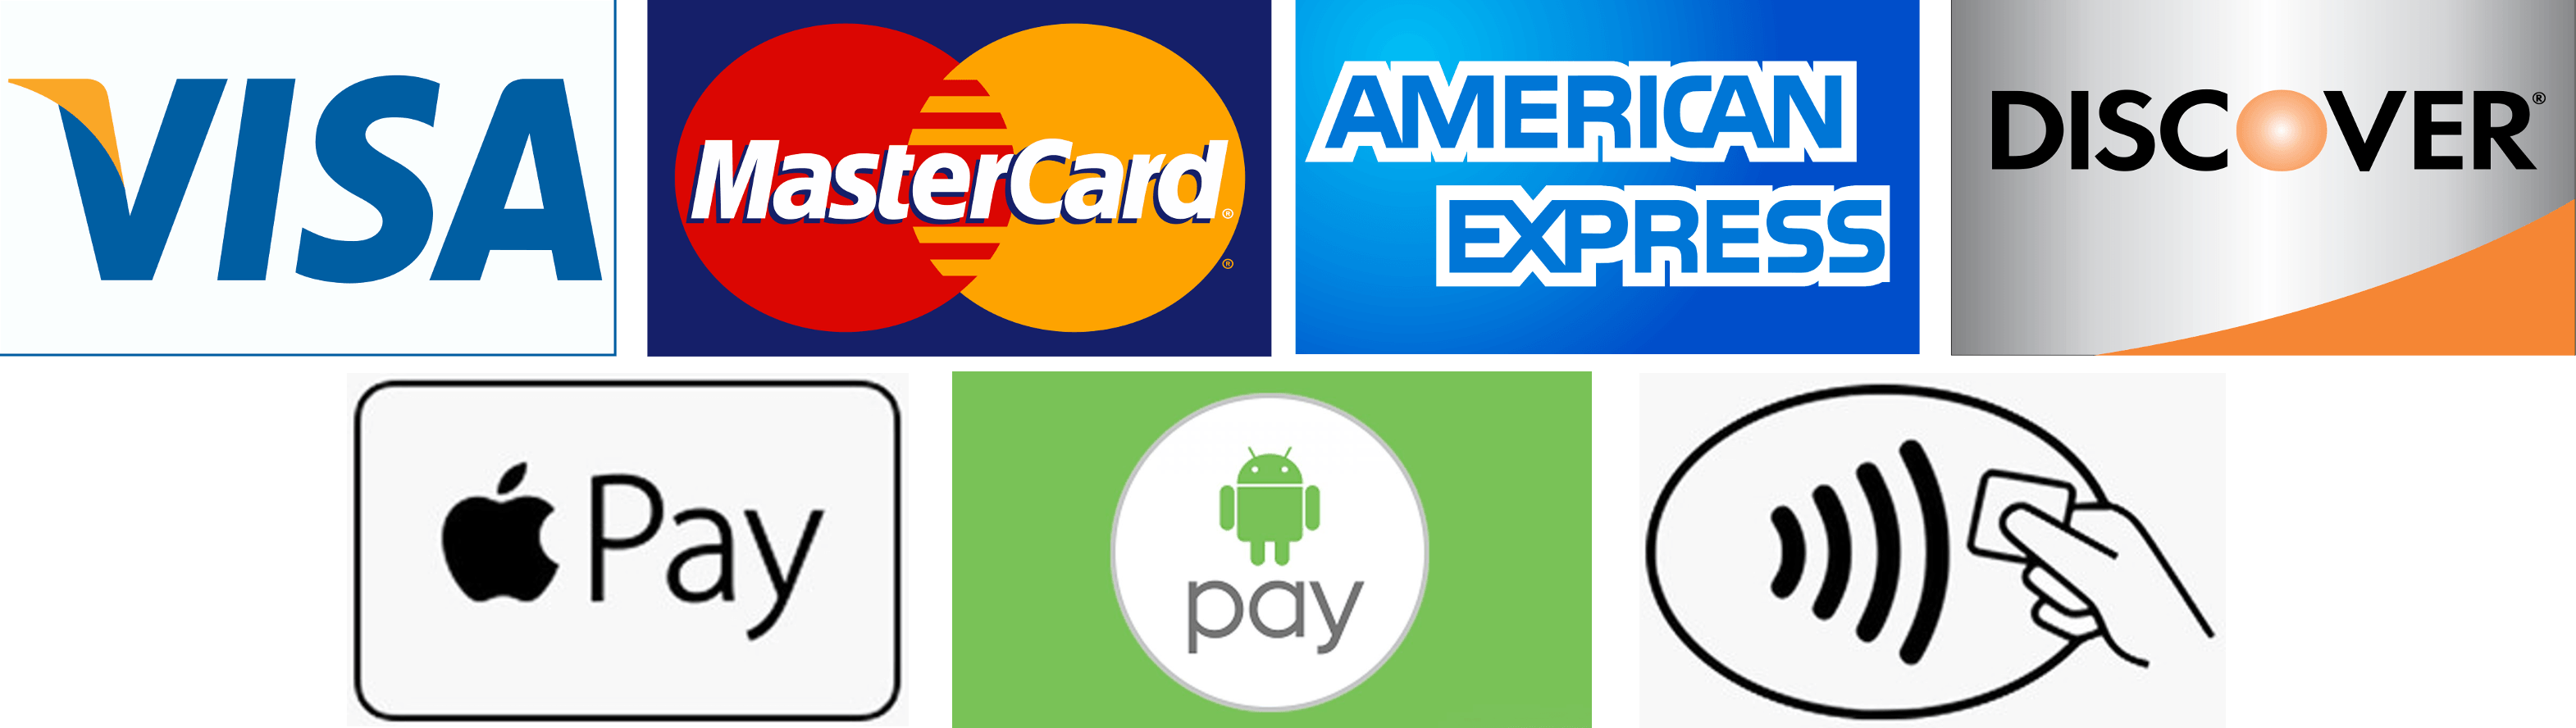 Apple or Android Pay Logo - America's Stonehenge: Hours & Pricing